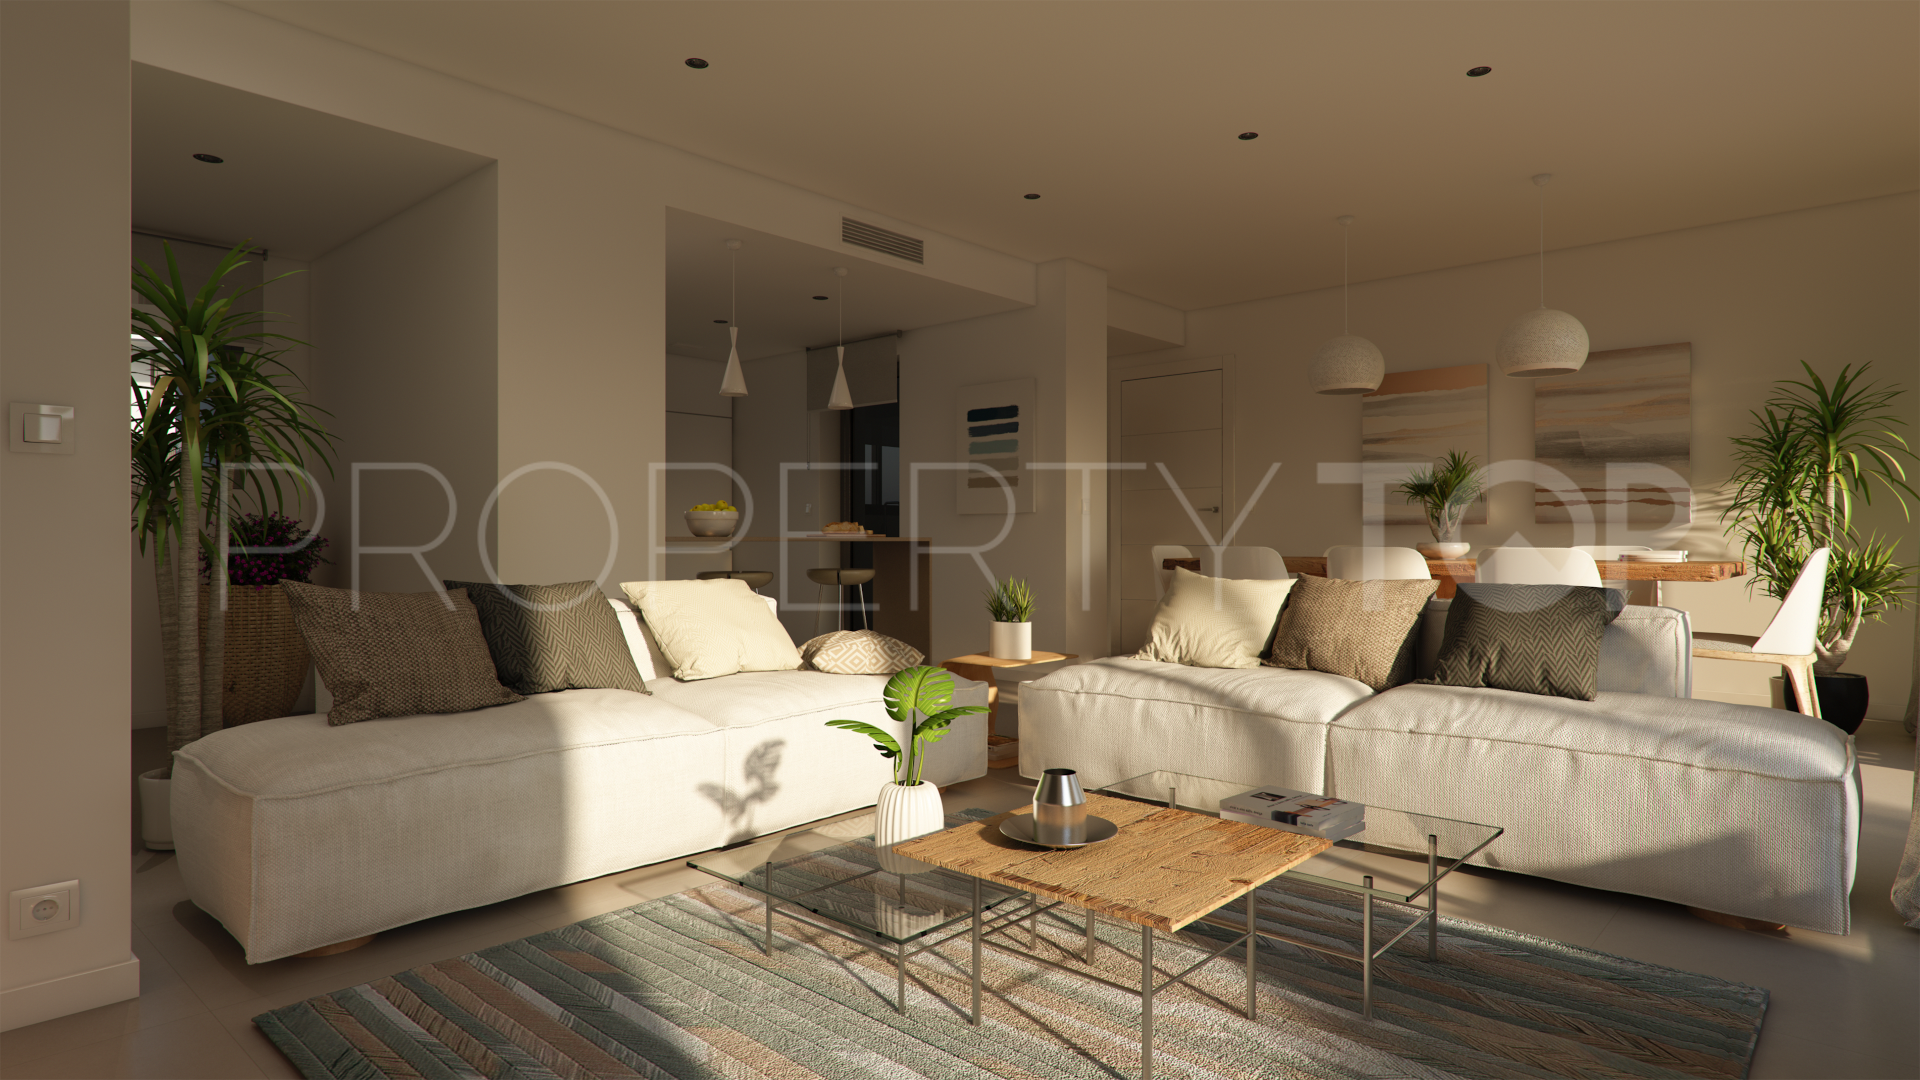 3 bedrooms Camarate Golf apartment for sale